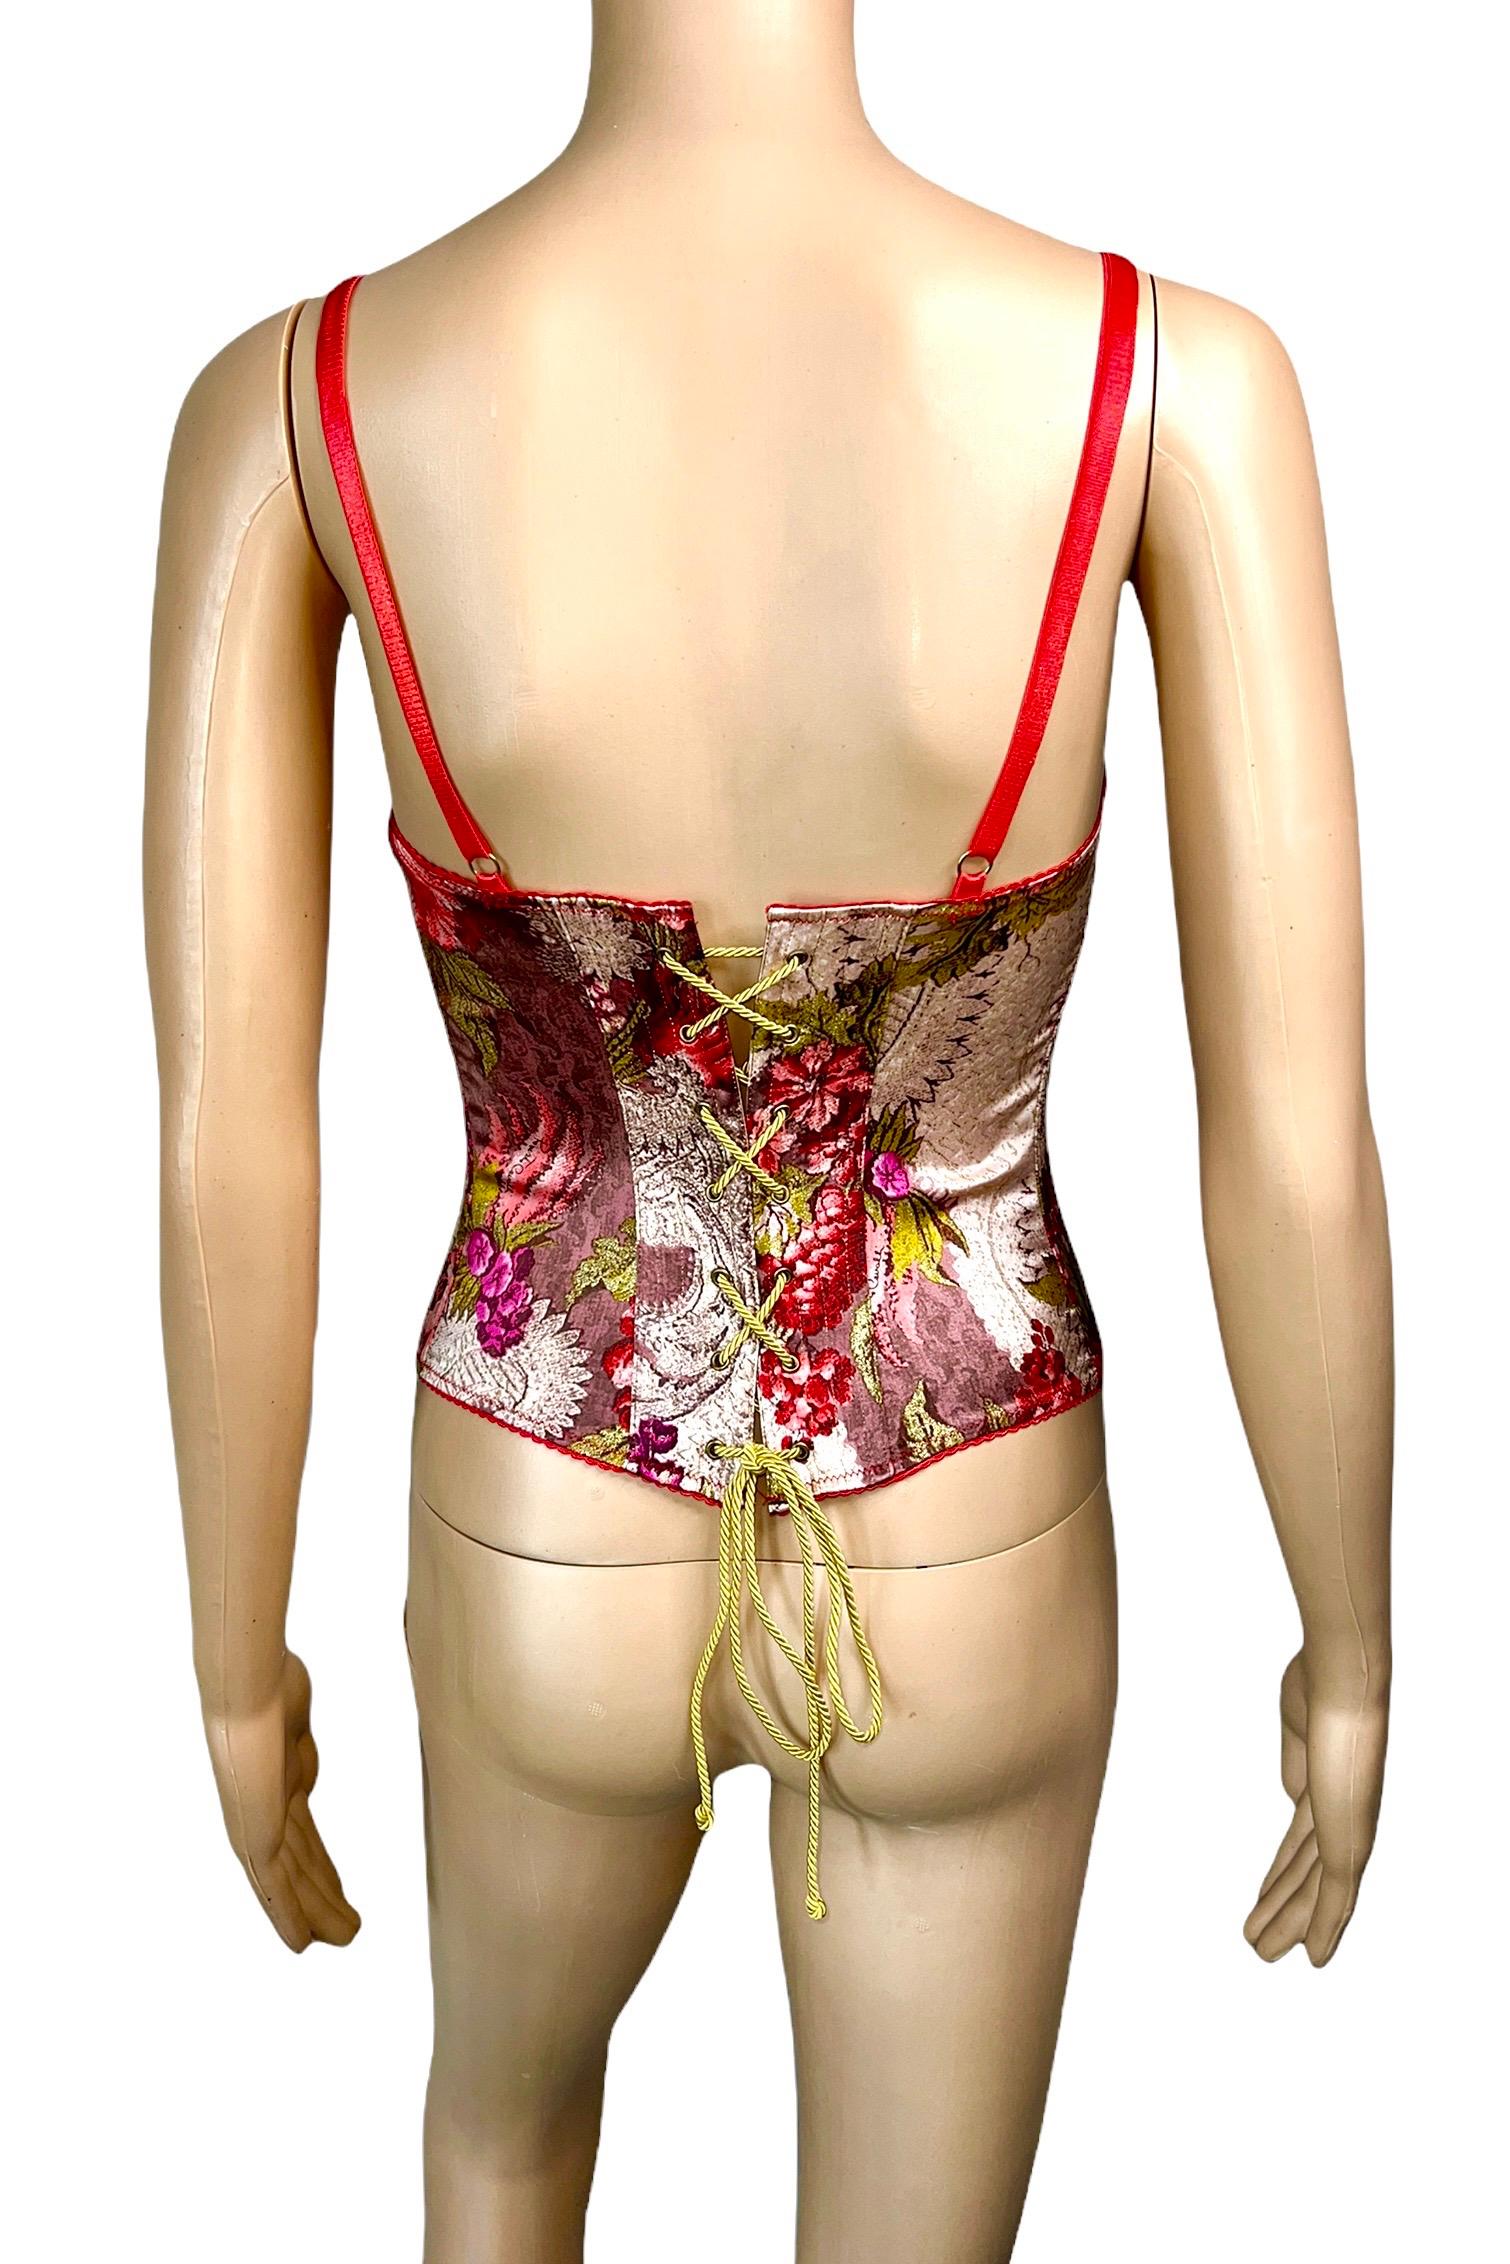 Roberto Cavalli F/W 2001 Unworn Bustier Corset Floral Print Top IT 42

Condition: New with Tags